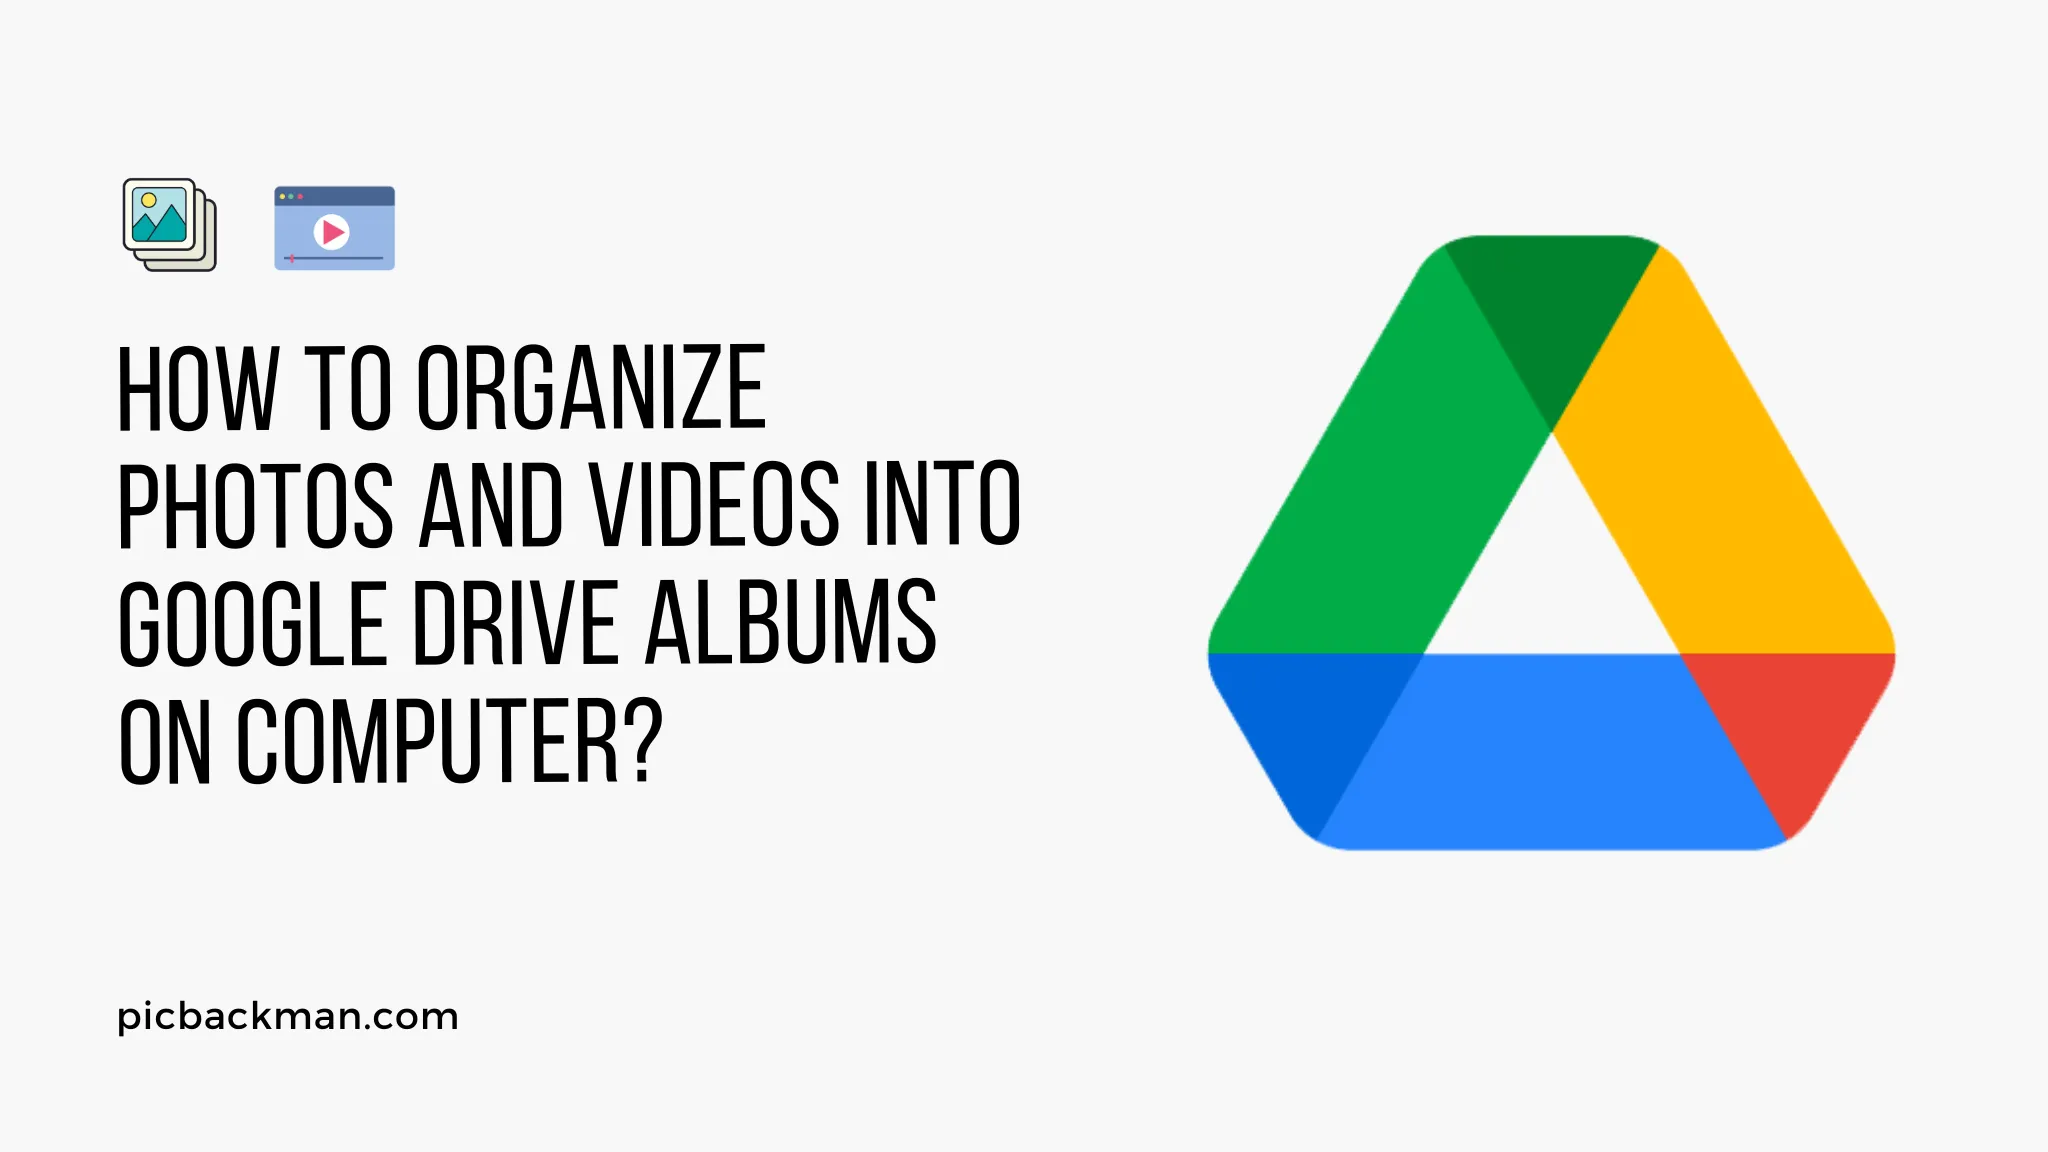 How to Organize Photos and Videos into Google Drive Albums on Computer